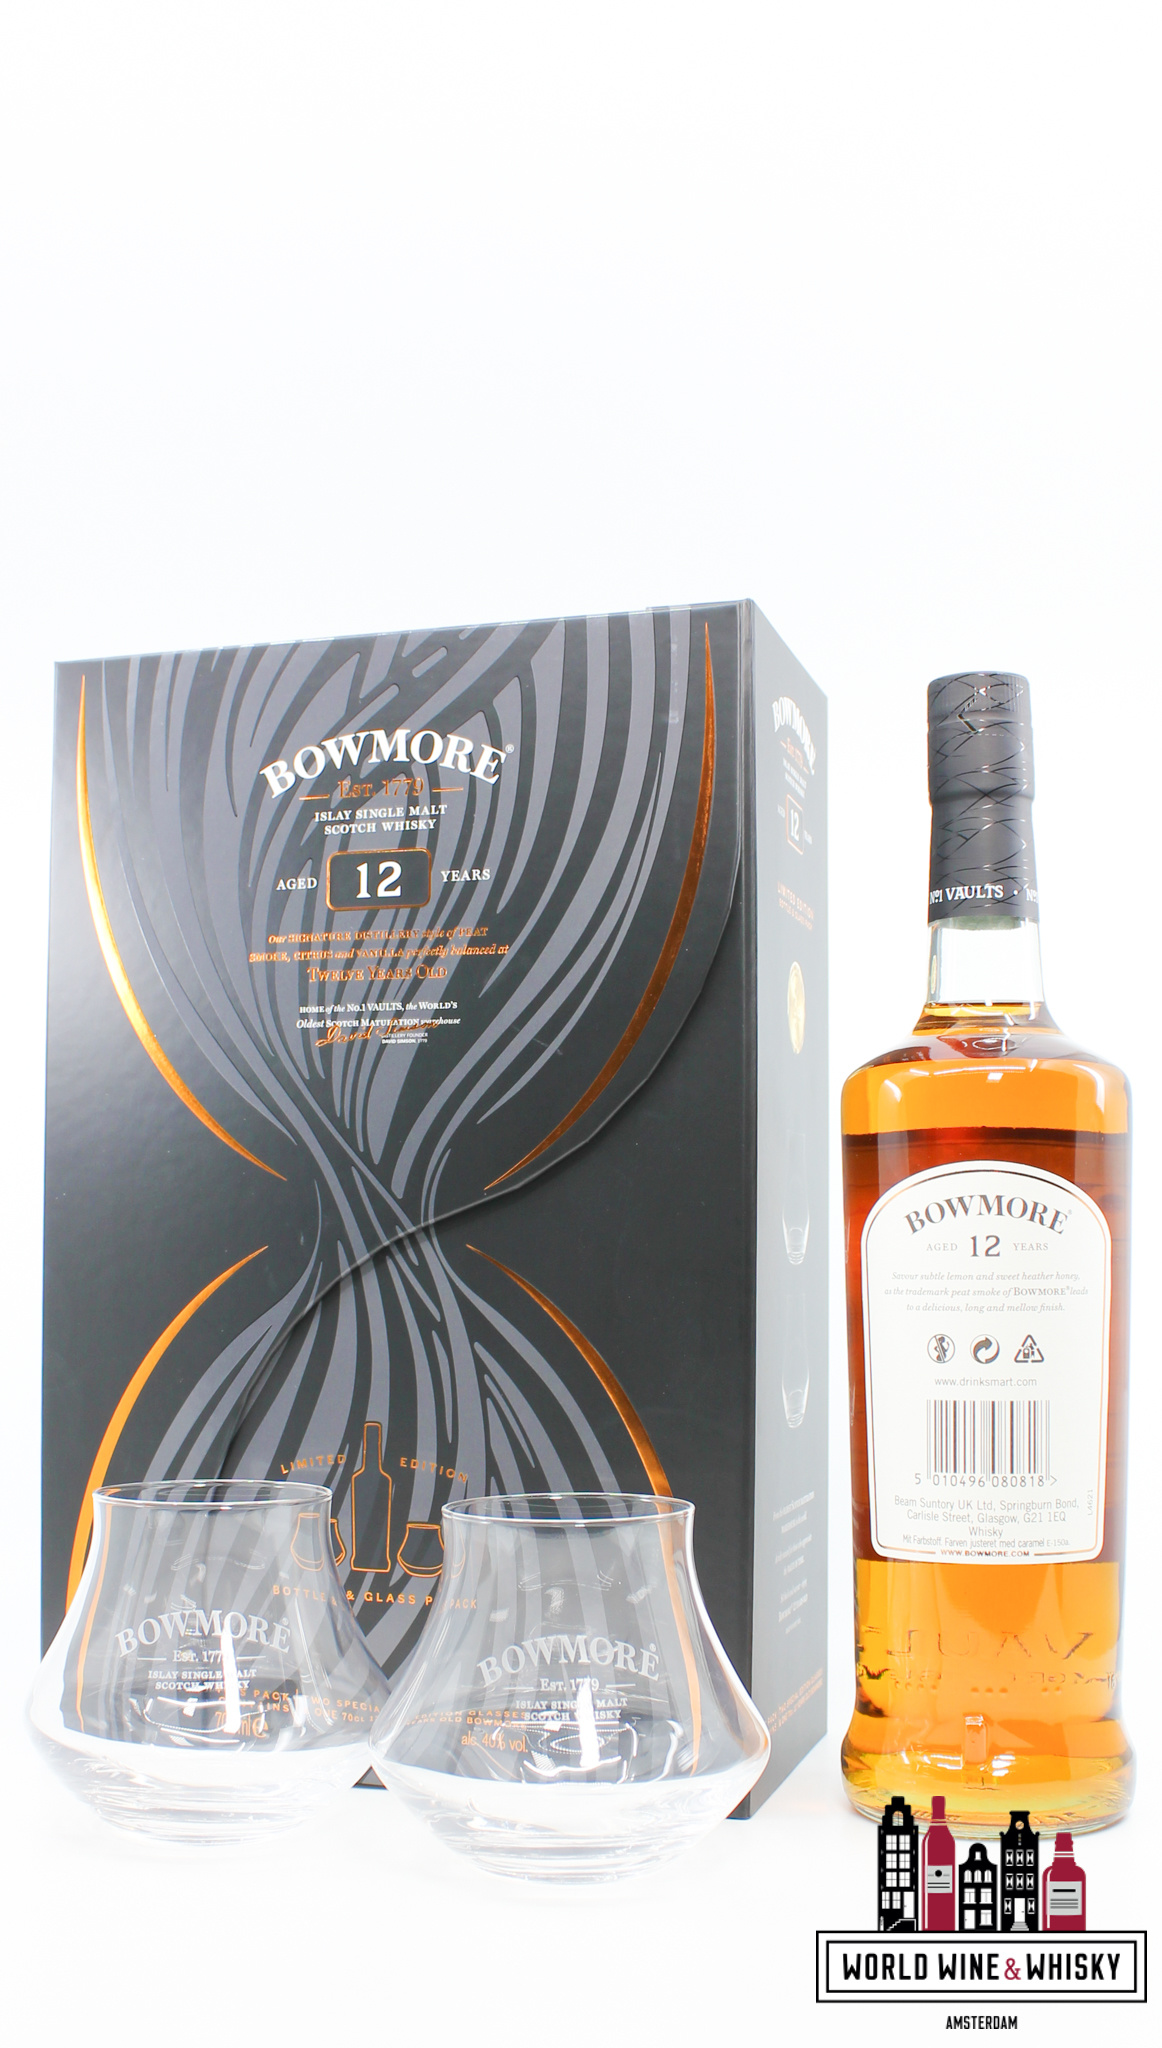 & two Whisky Old, Giftbox World / glasses special - Giftpack 12 Bowmore 40% Wine Years incl.